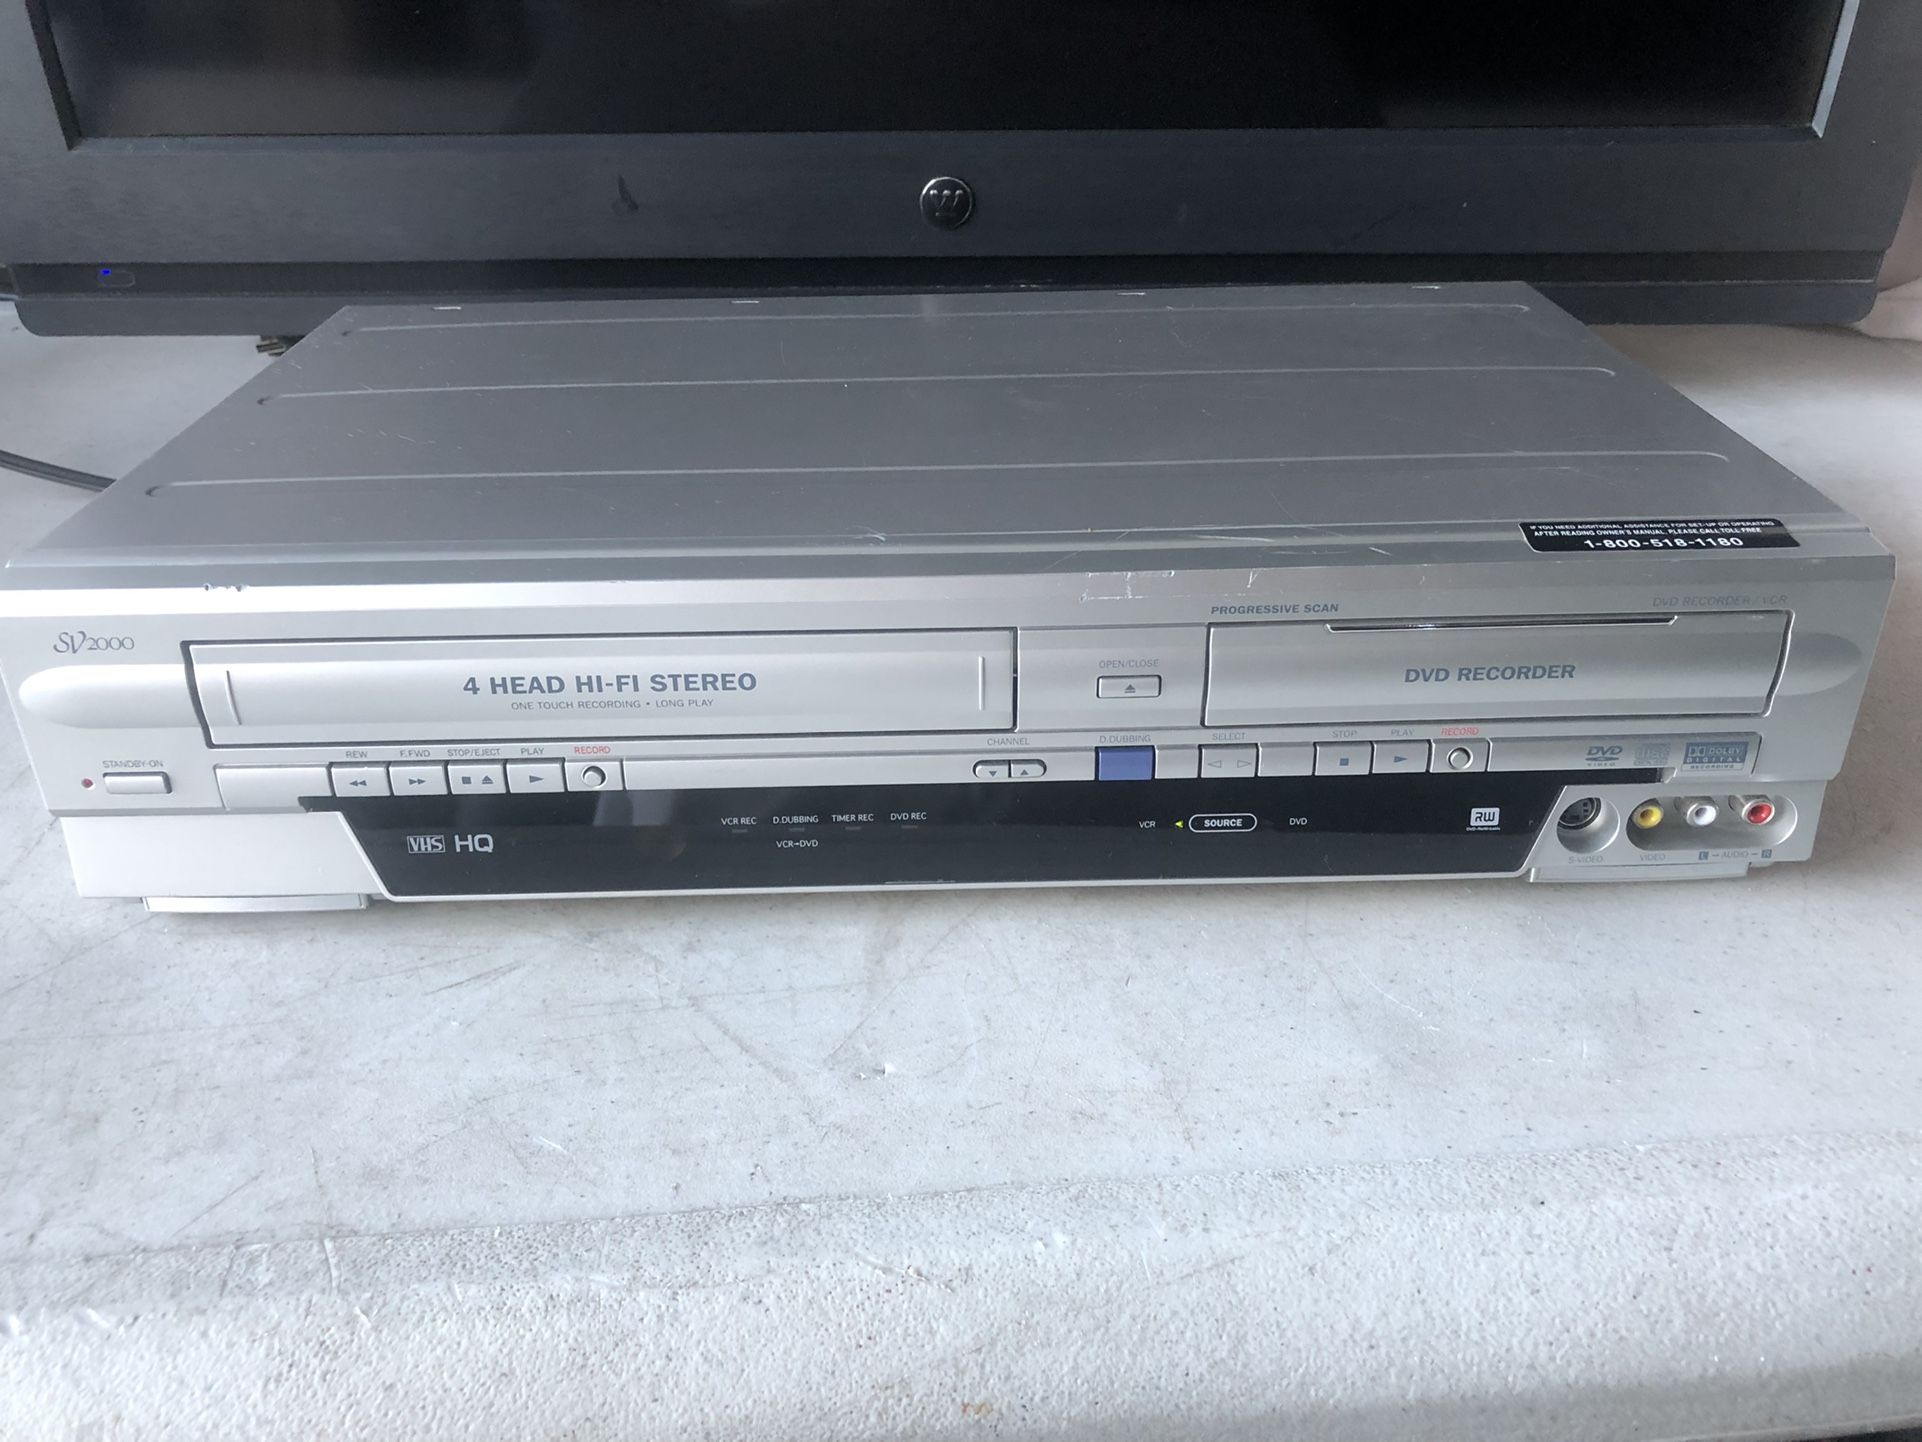 PRICE IS FIRM Funai WV20V6 SV2000 DVD Recorder and VCR Combo Includes RCA CABLE  125  You are more than welcome to test the item before you pay us.   